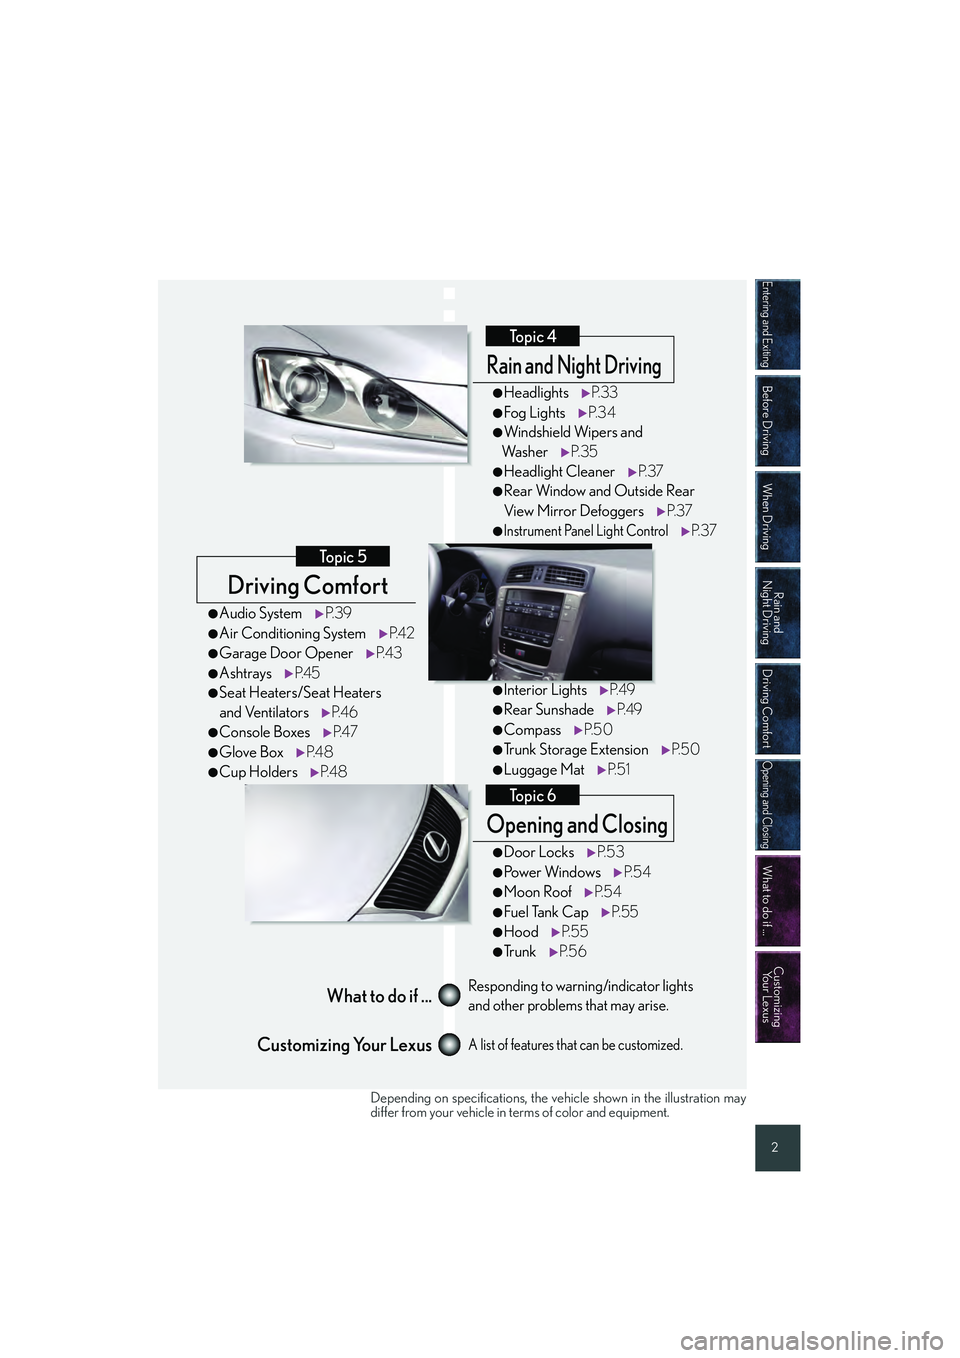 Lexus IS250 2009  Quick Guide Entering and Exiting
Before Driving
When Driving
Rain and 
Night Driving
Driving Comfort
Opening and Closing
What to do if ...
Customizing Yo u r  L e x u s
2
IS_U (L/O_0808)
Driving Comfort
Topic 5
O